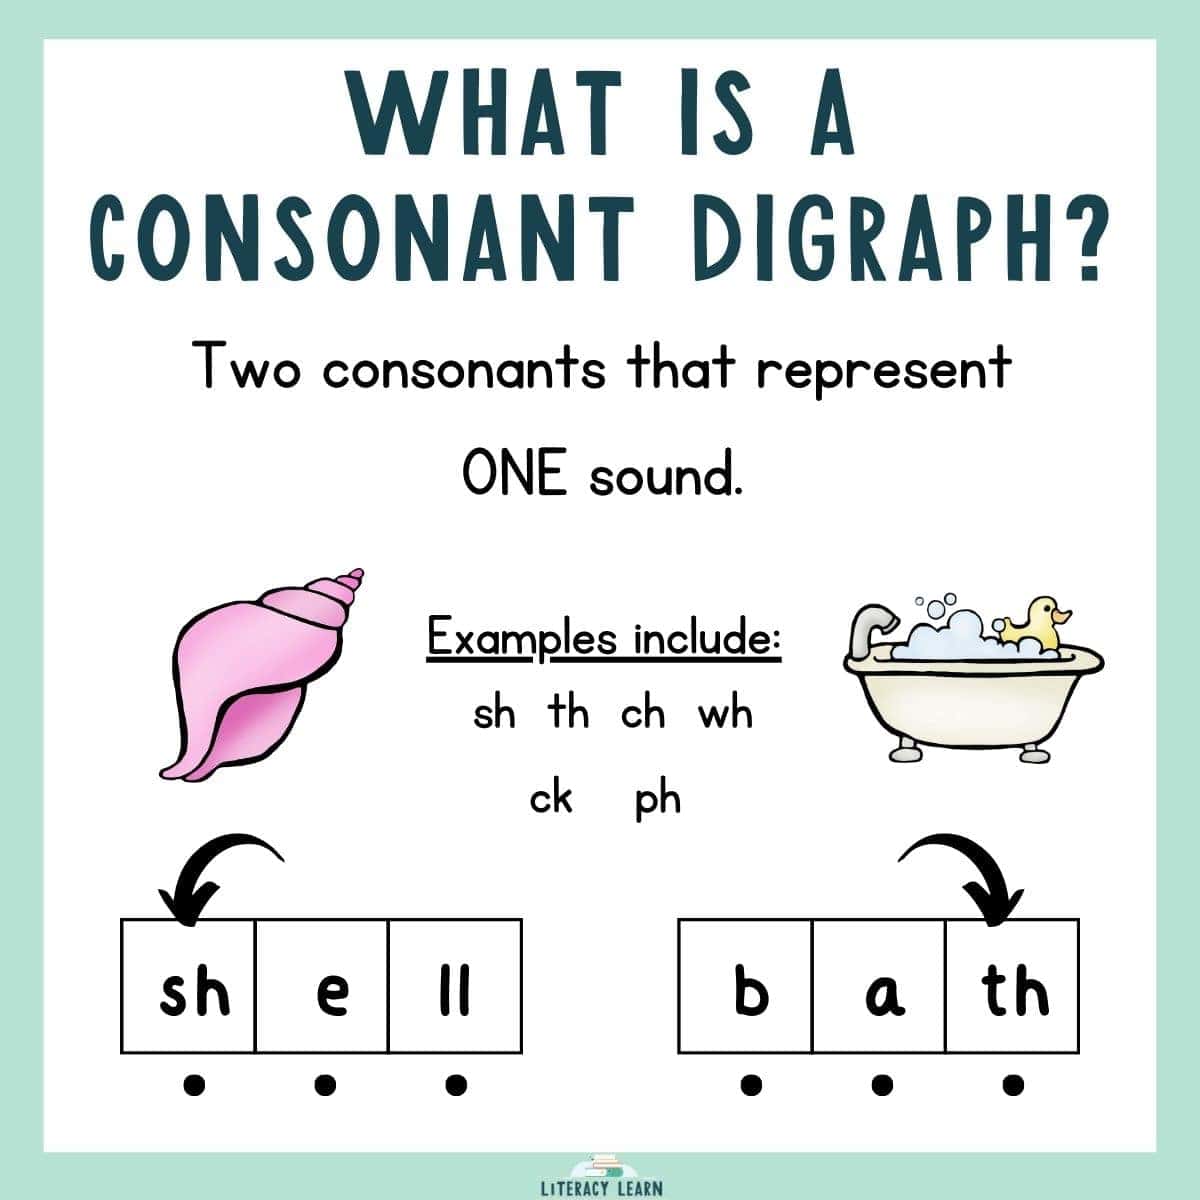 Graphic titled "What is a consonant digraph" with definition, examples, and words and pictures.